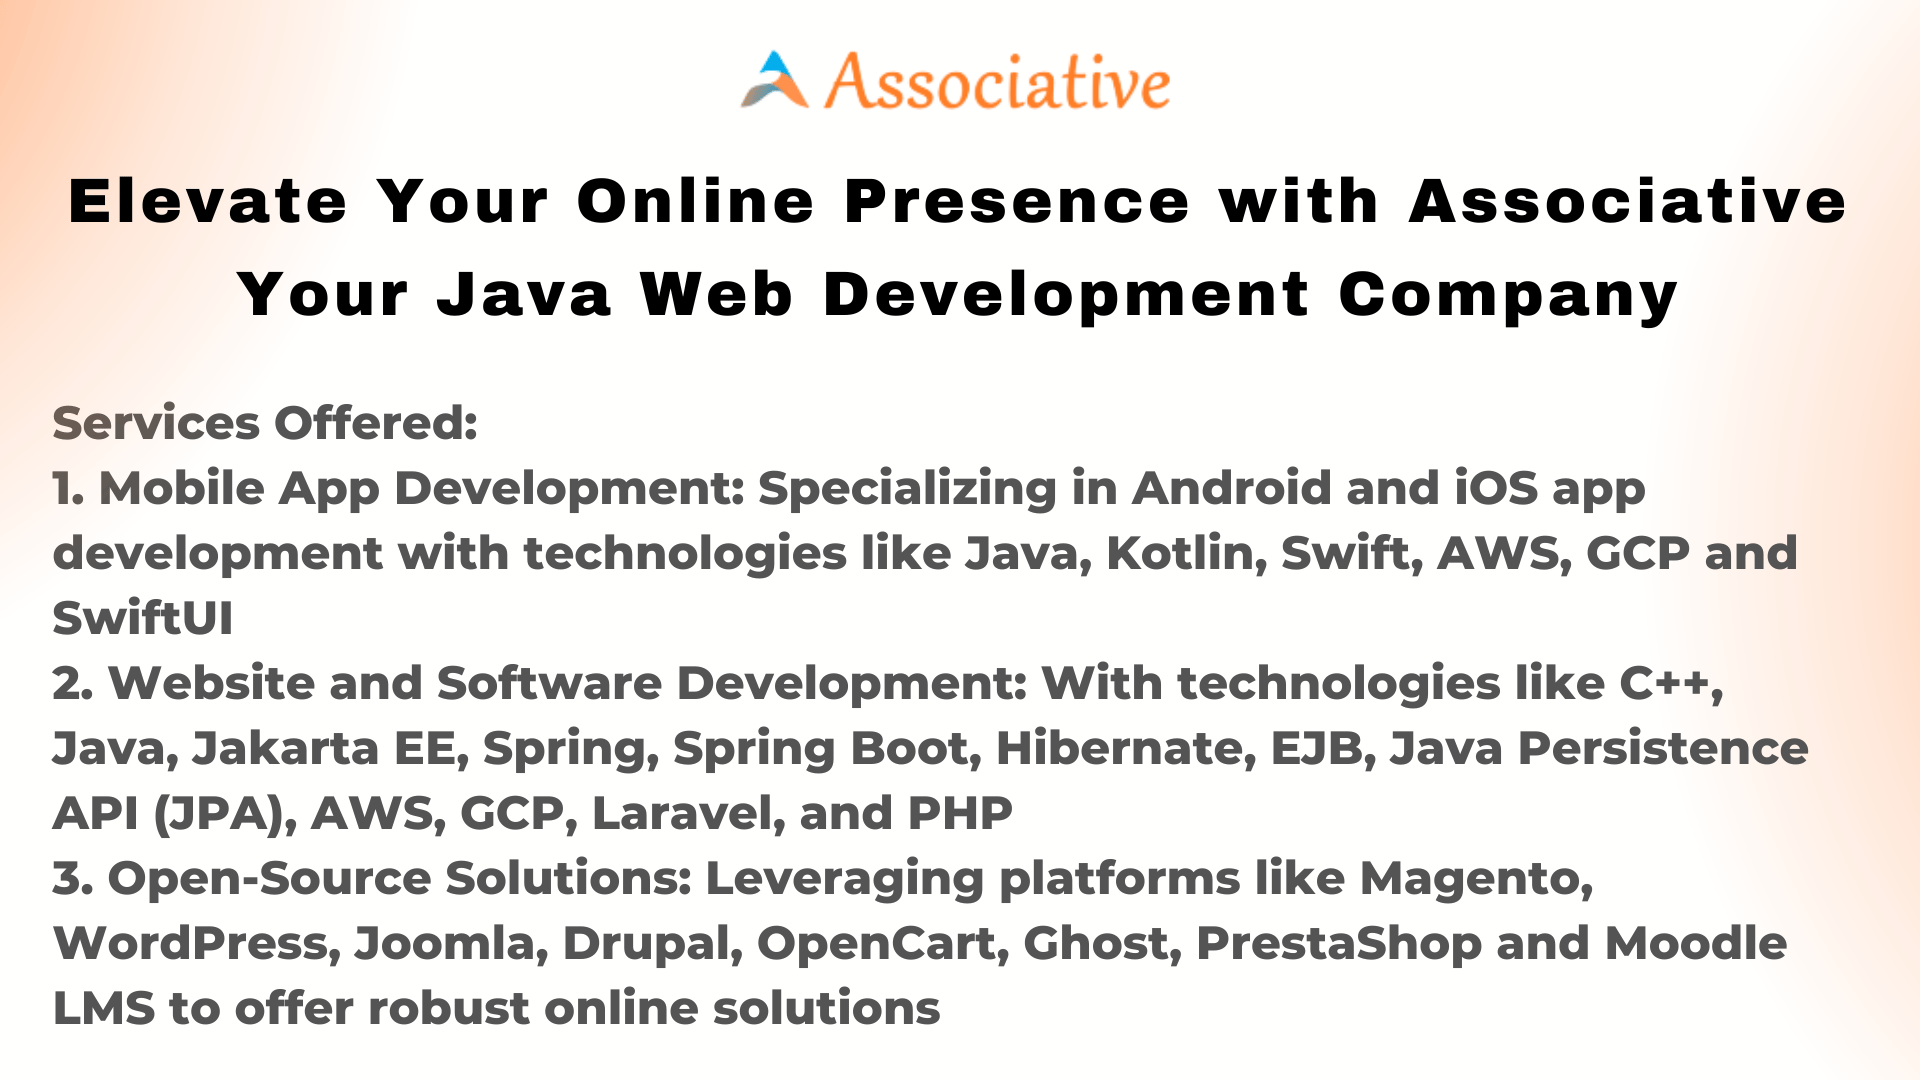 Elevate Your Online Presence with Associative Your Java Web Development Company